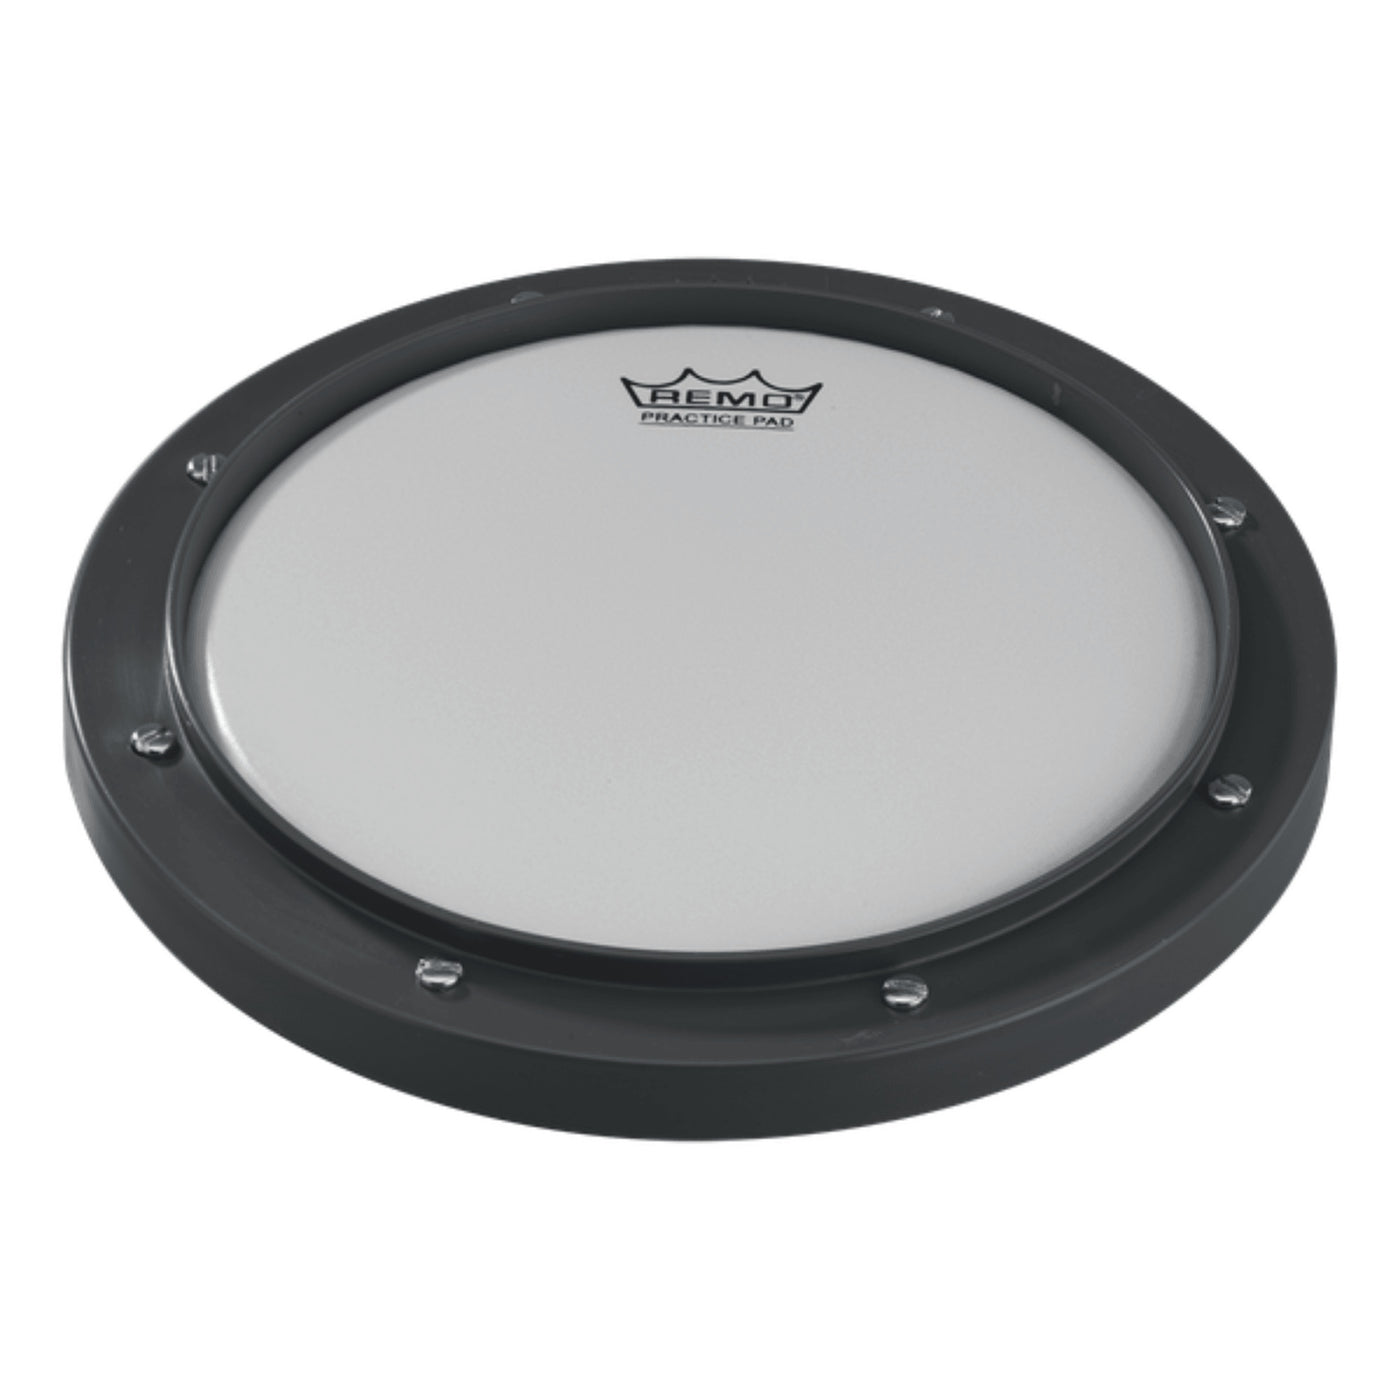 Remo RT-0008-00 8" Tunable Practice Pad